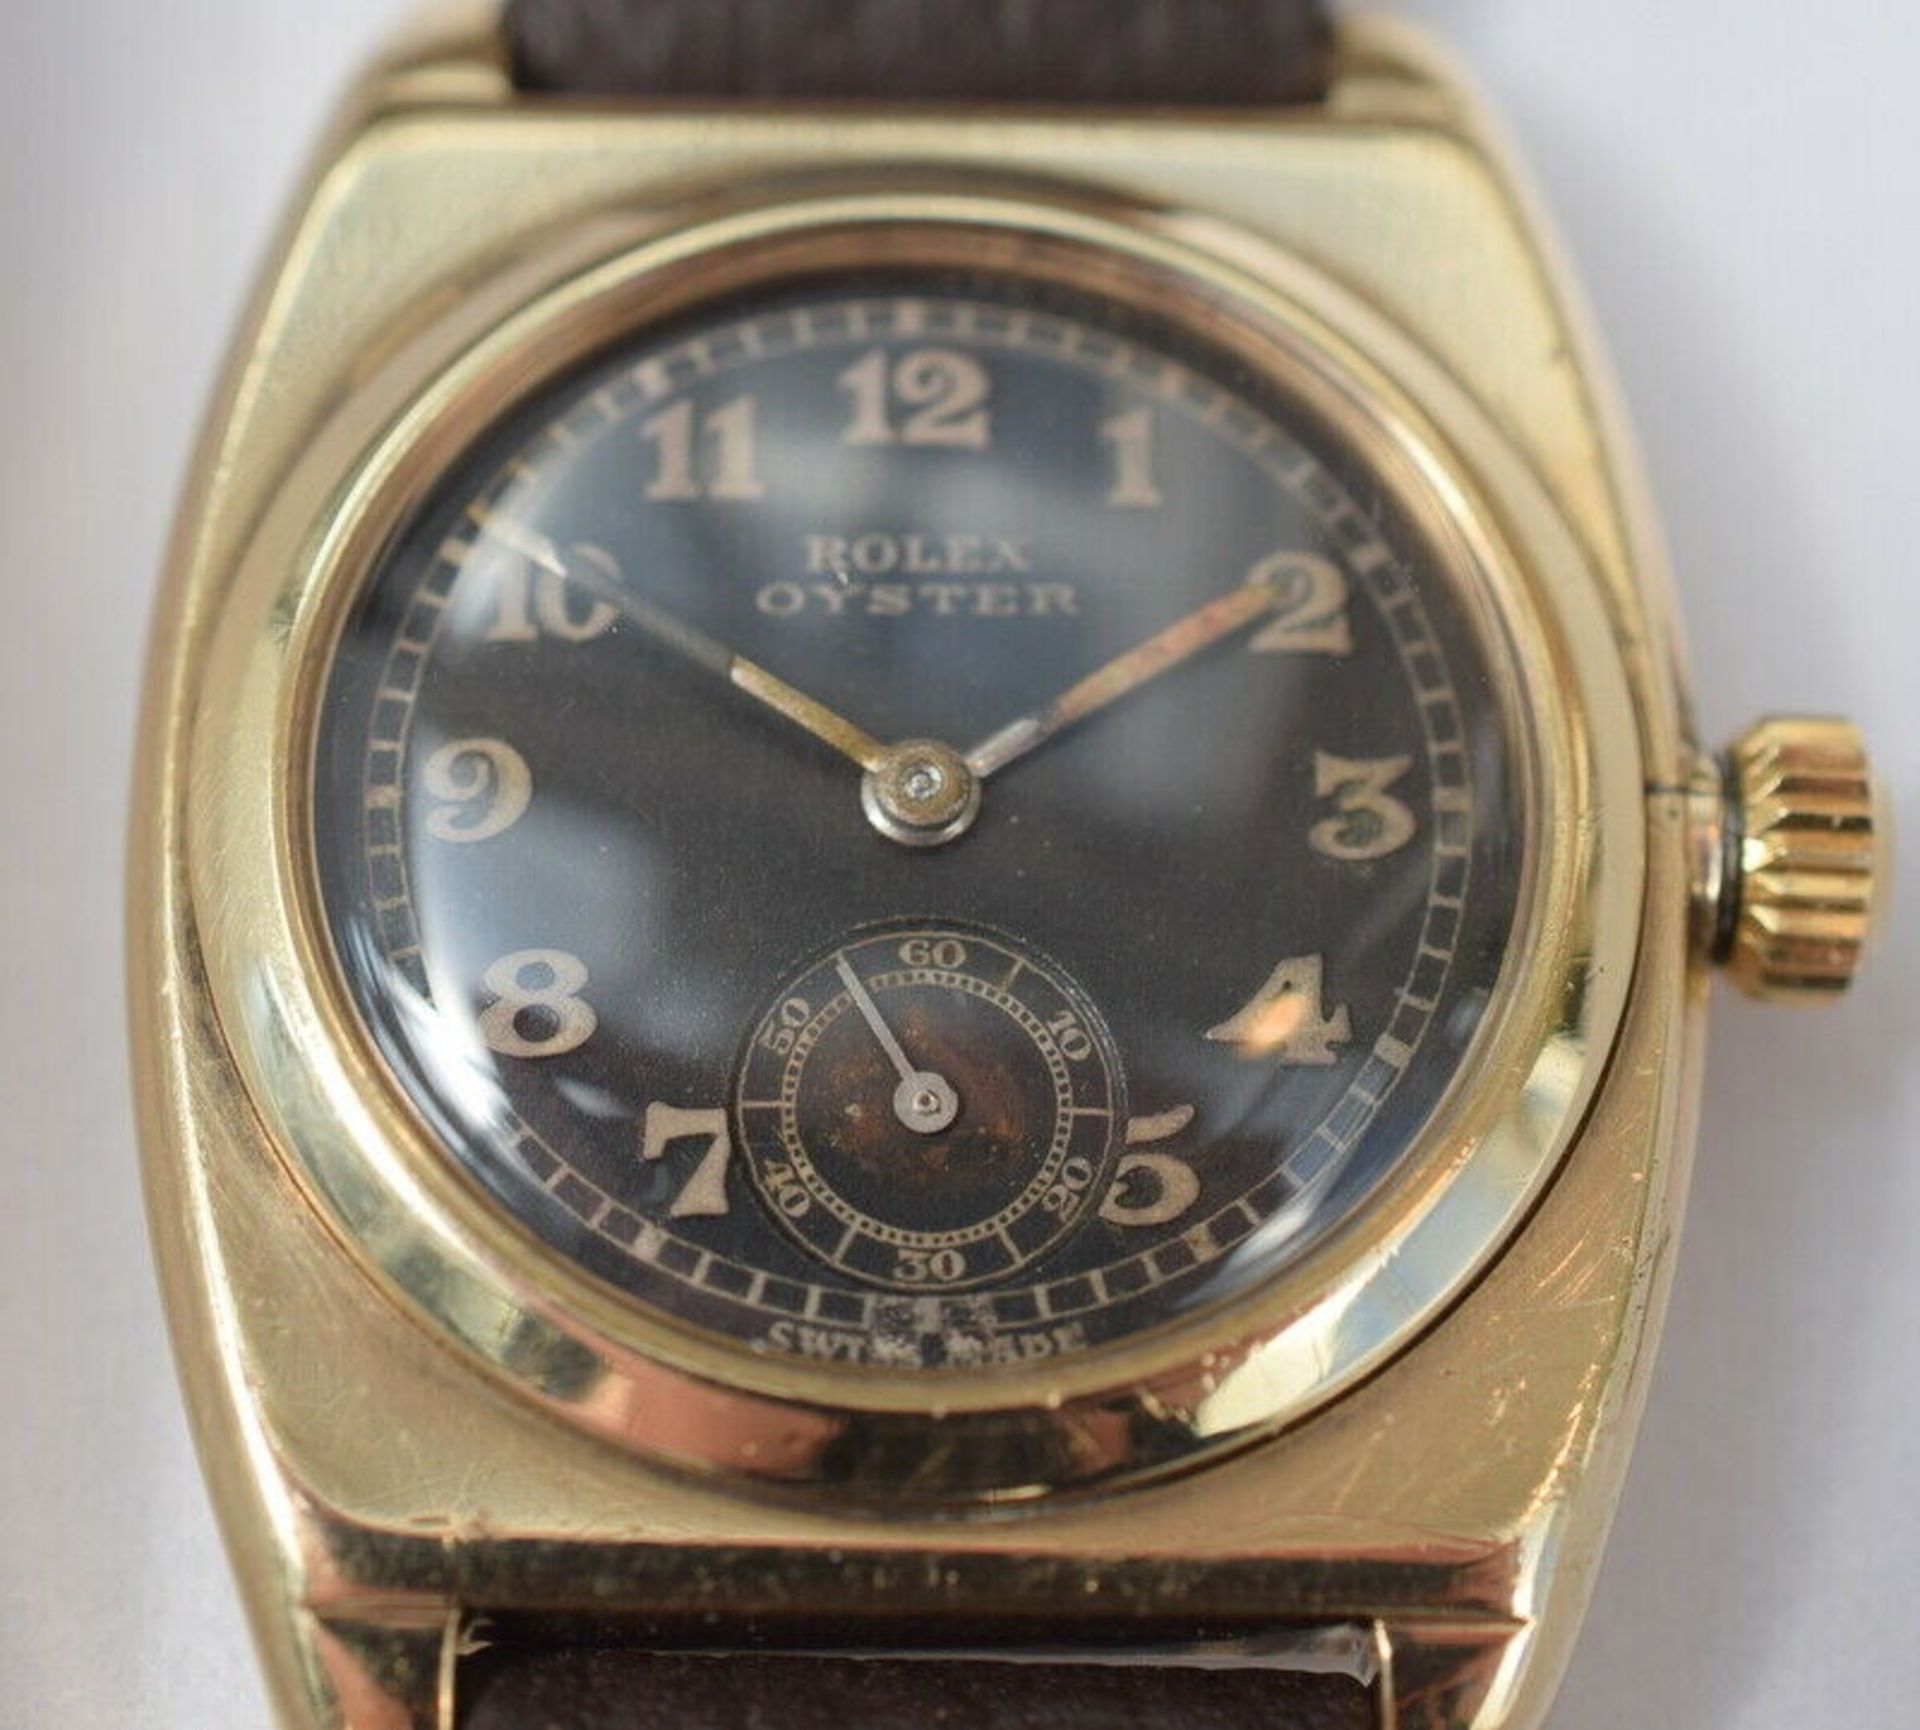 Rare Black Dial Rolex Oyster Viceroy 9ct Gold 1933 Chronometer - Image 2 of 11